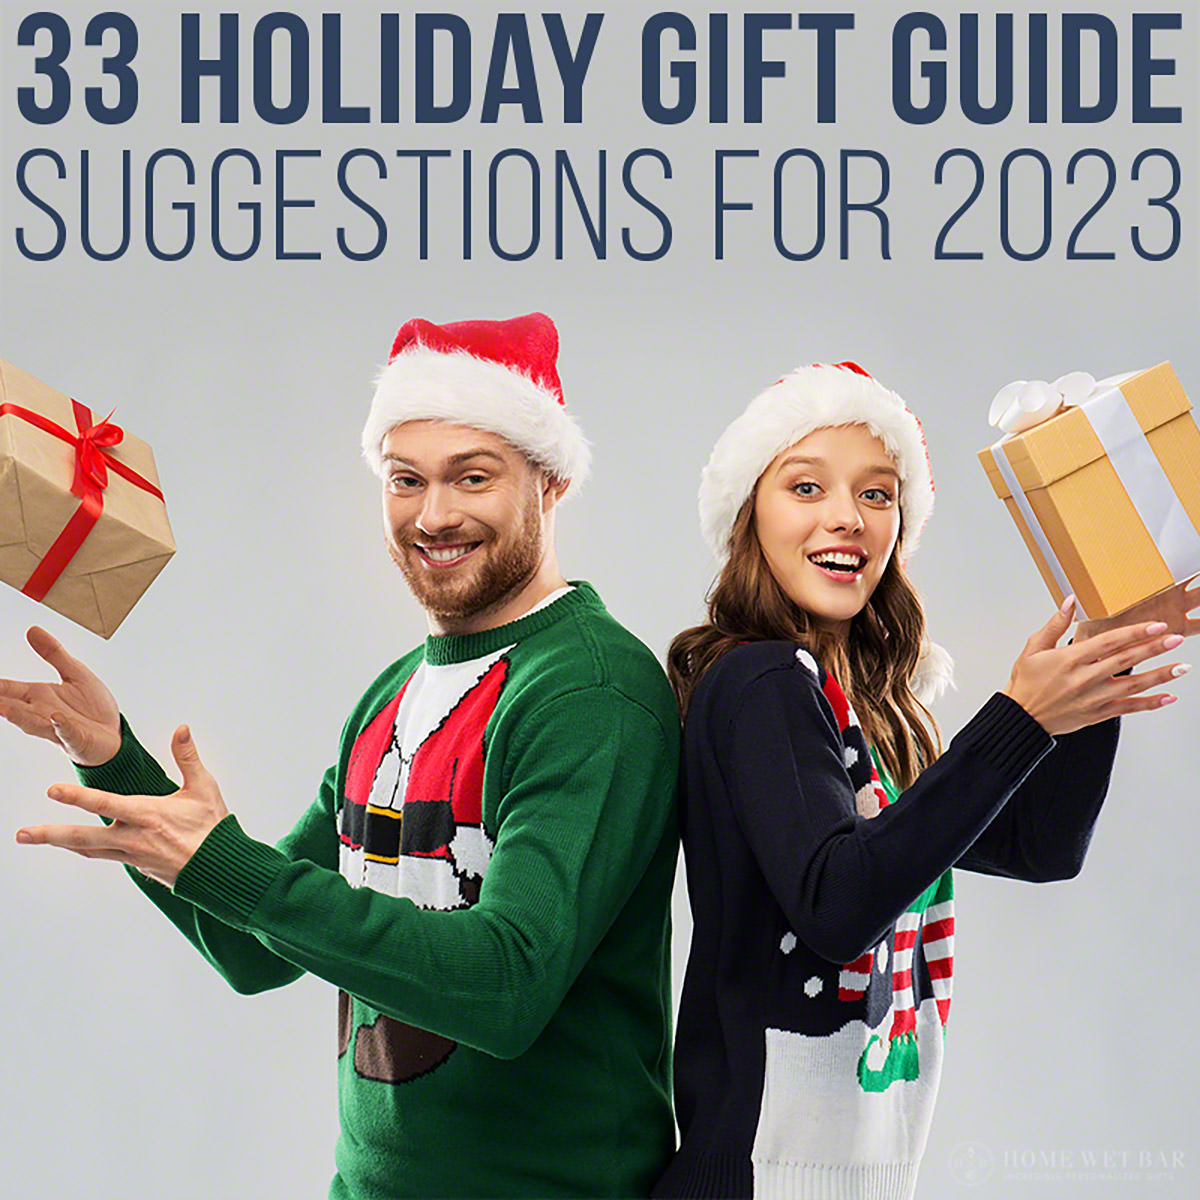 https://www.homewetbar.com/blog/wp-content/uploads/2020/12/33-holiday-gift-guide-suggestions-for-2023.jpg